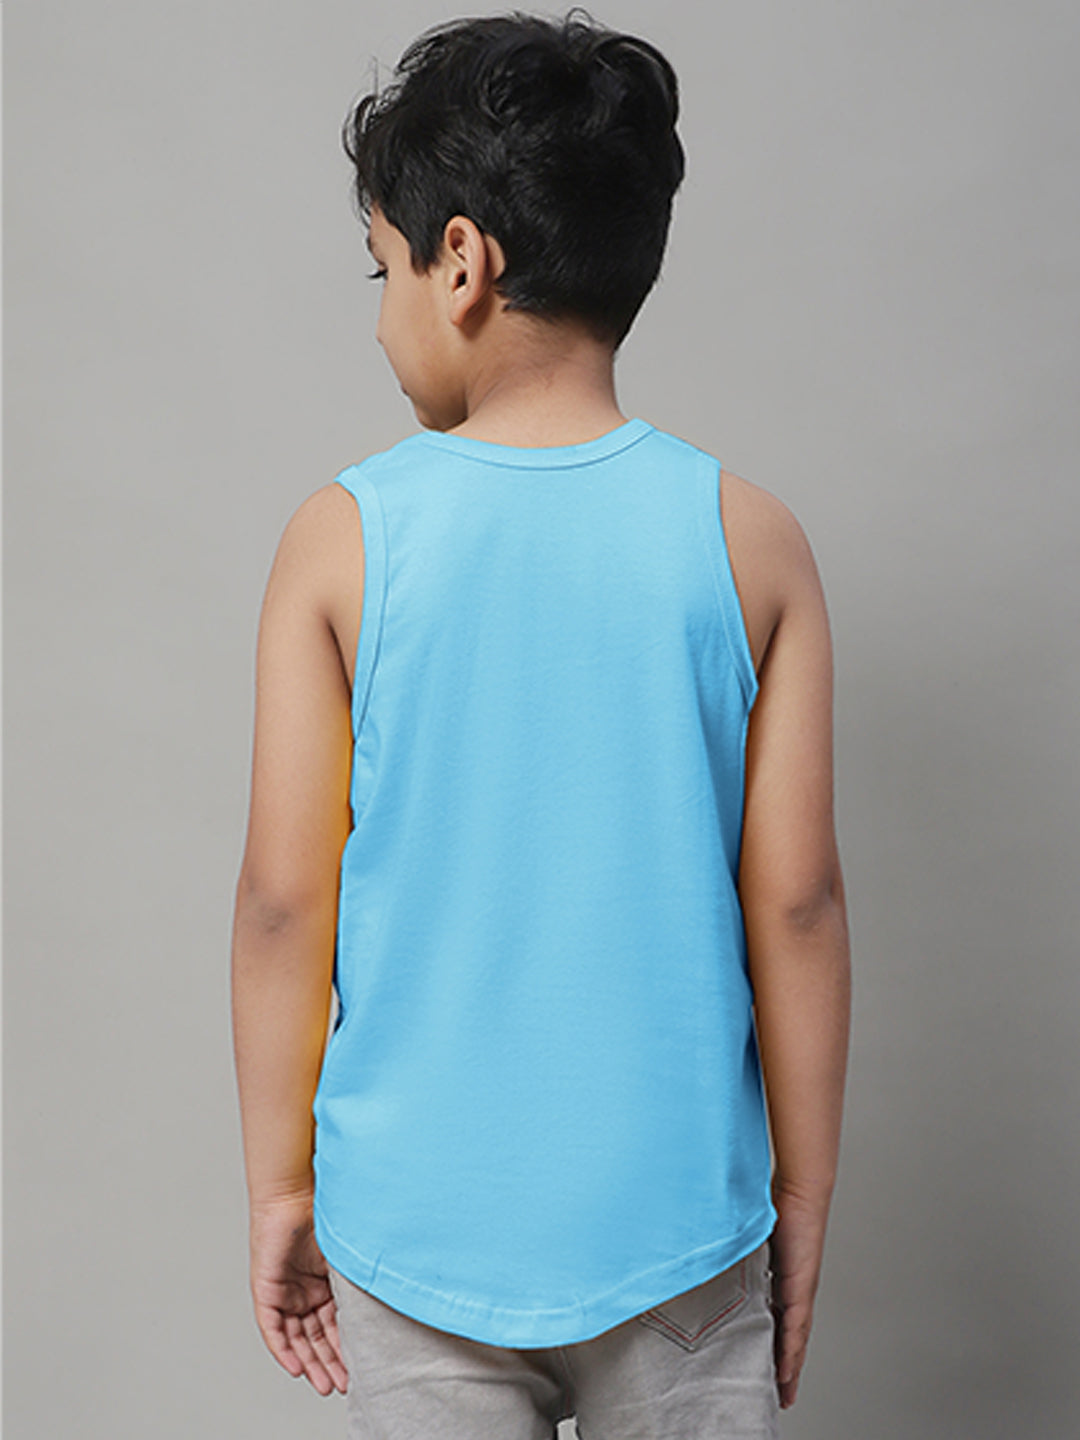 Boys Its Never Too Late For Fun Printed Regular Fit Vest - Friskers